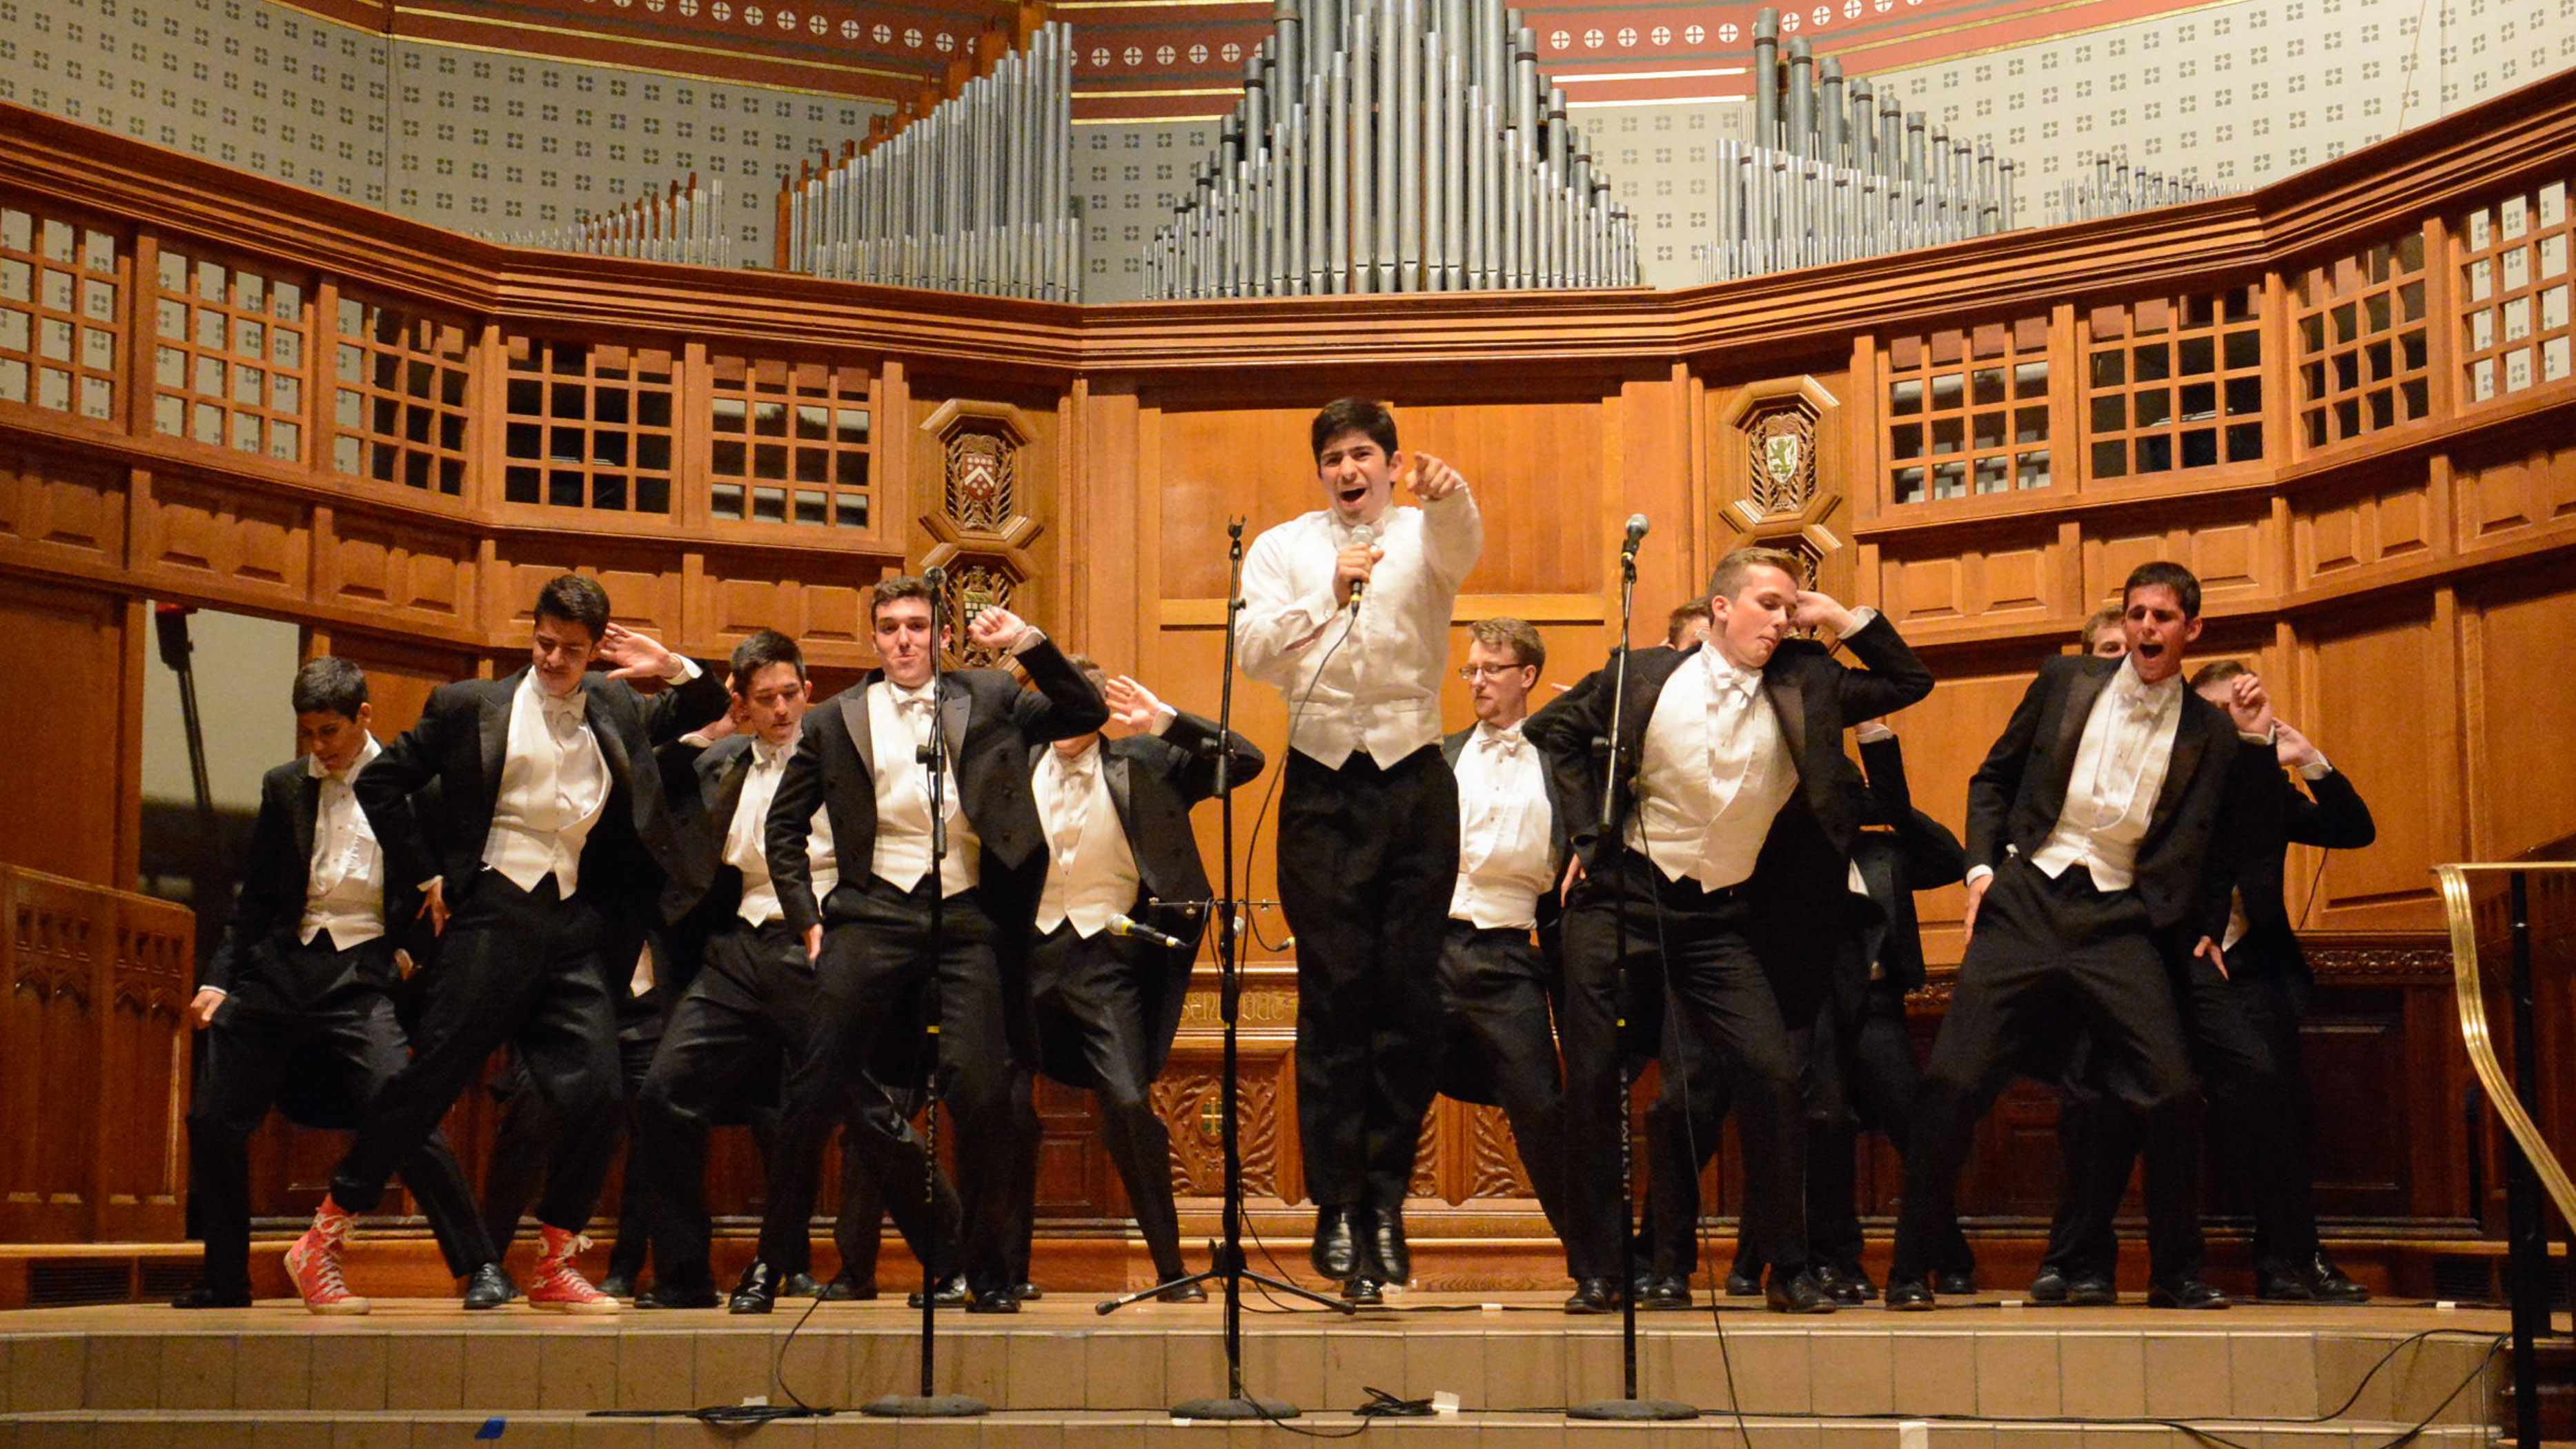 The Spizzwinks(?) of 2014 perform during the Centennial Reunion